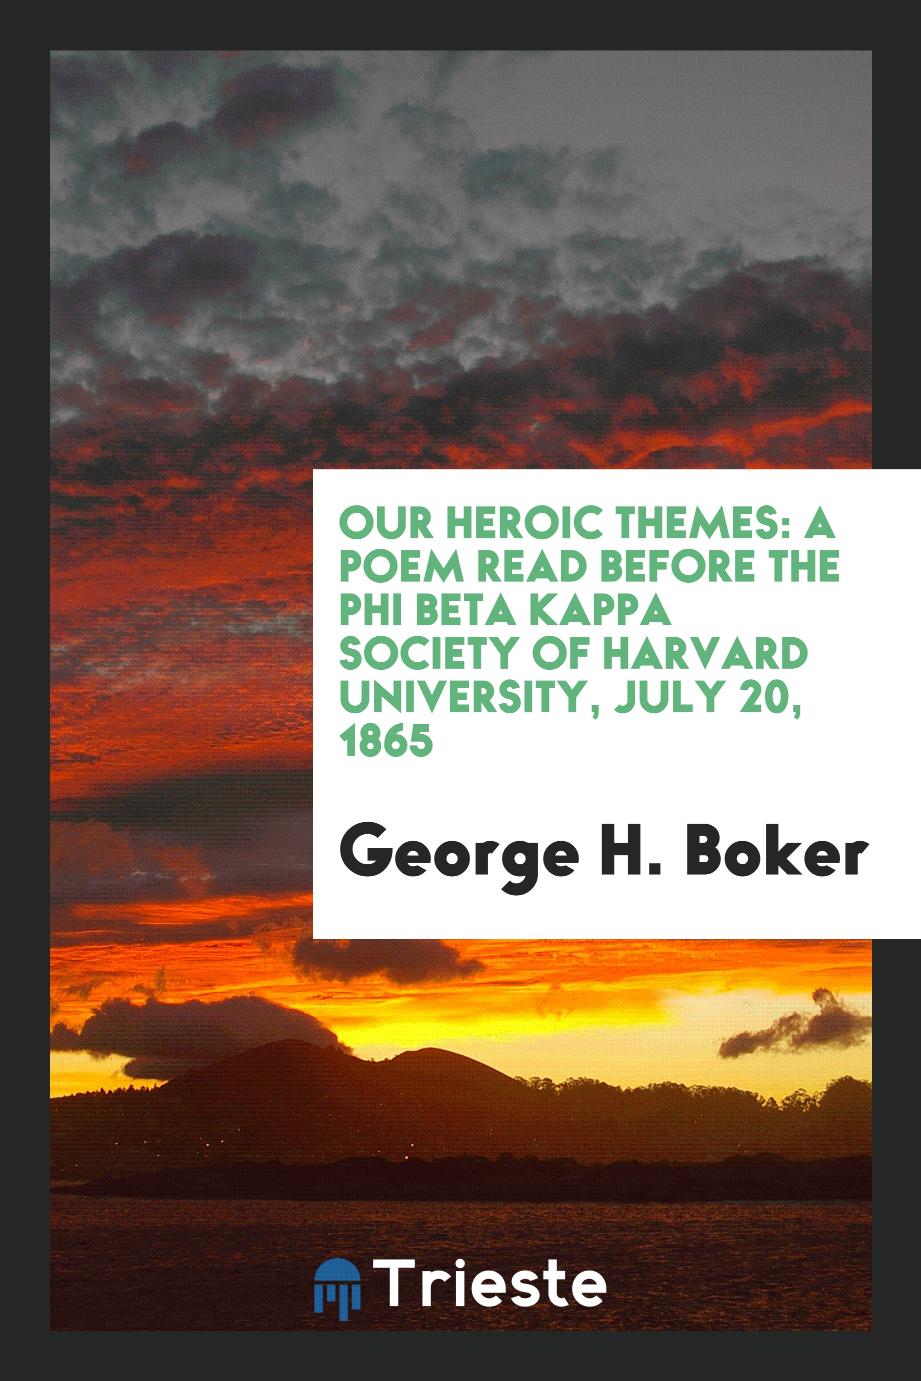 Our Heroic Themes: A Poem Read Before the Phi Beta Kappa Society of Harvard University, July 20, 1865